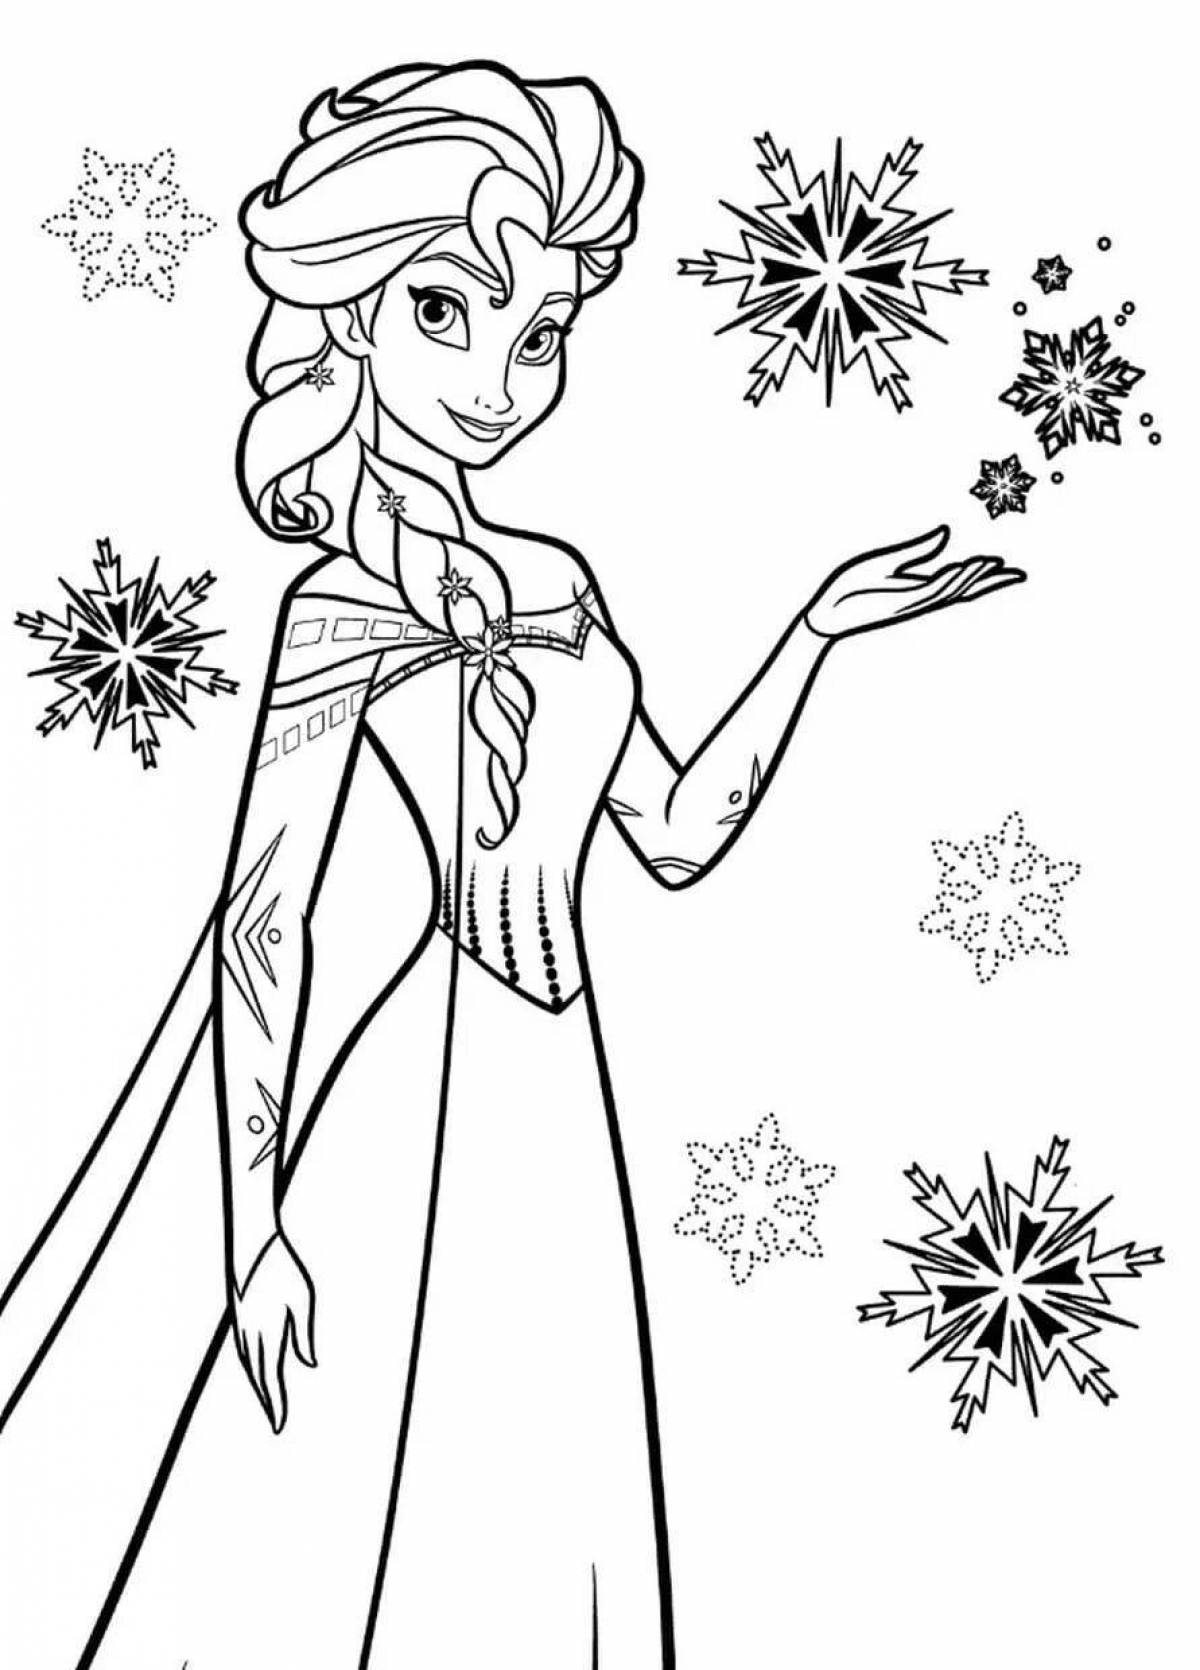 Elsa art coloring book for kids 6-7 years old